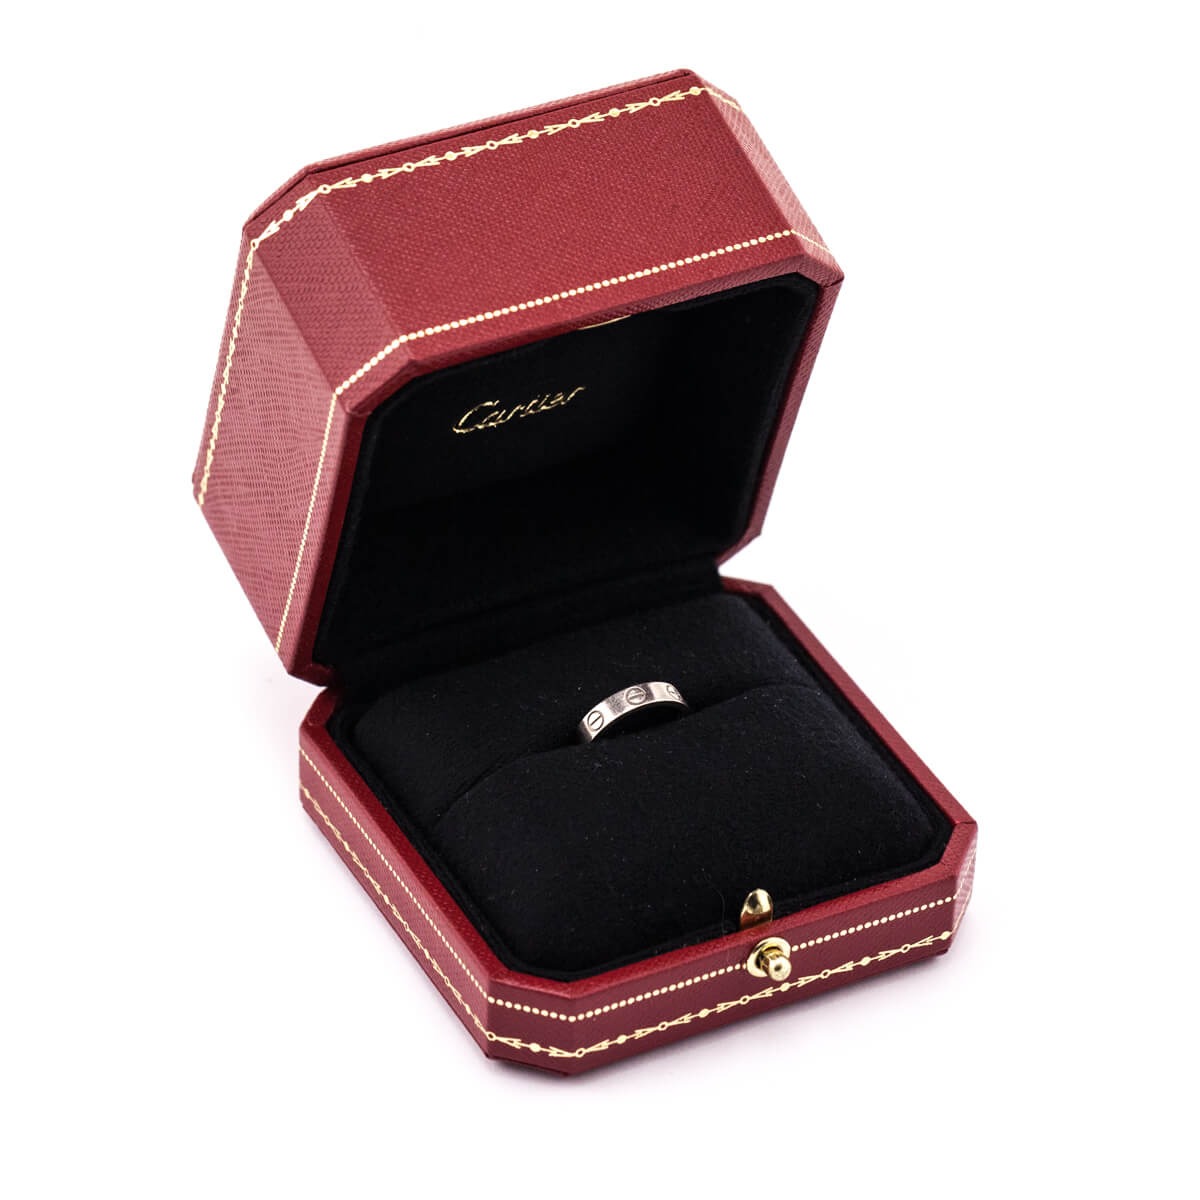 Cartier 18K White Gold Mini Love Wedding Band Ring Size 3.75 - Love that Bag etc - Preowned Authentic Designer Handbags & Preloved Fashions